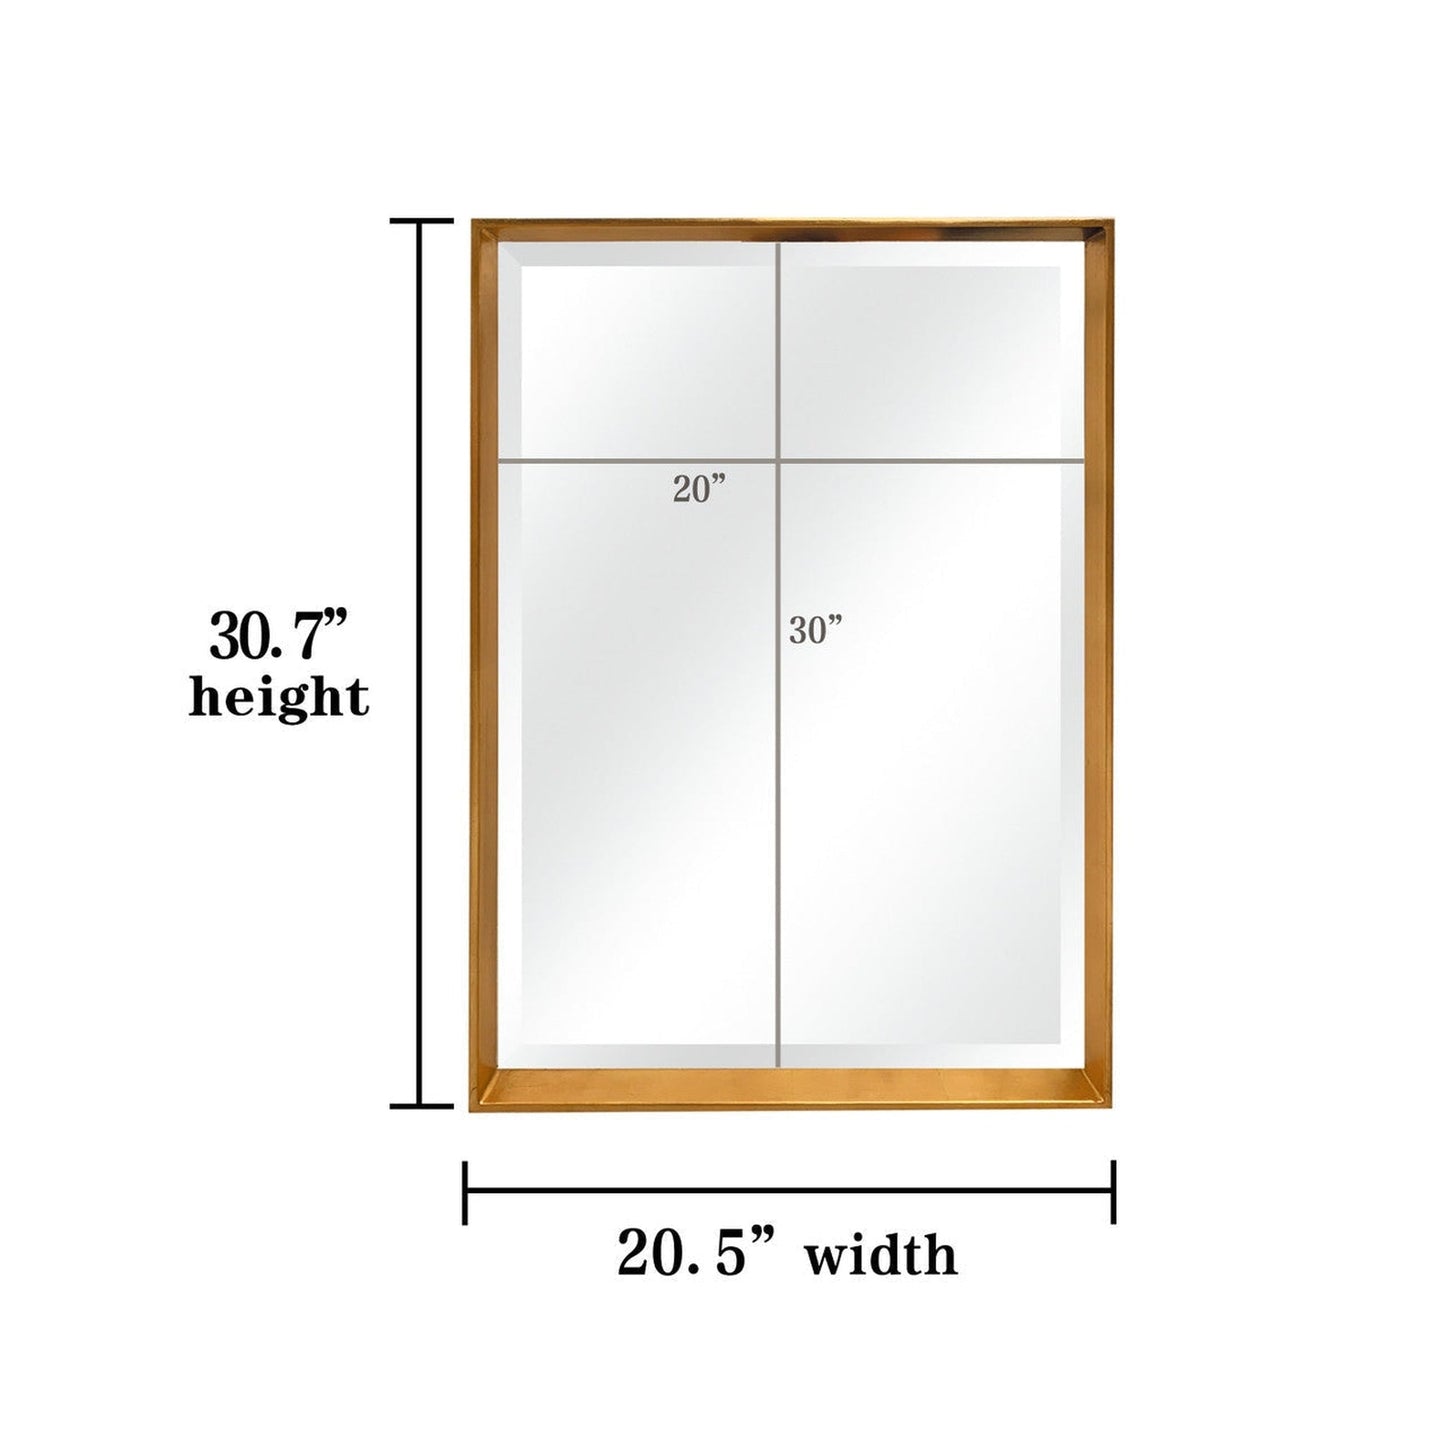 SBC Decor Mia Modern 20" x 37" Wall-Mounted Tray Frame Long Wall Mirror In Brushed Gold Finish